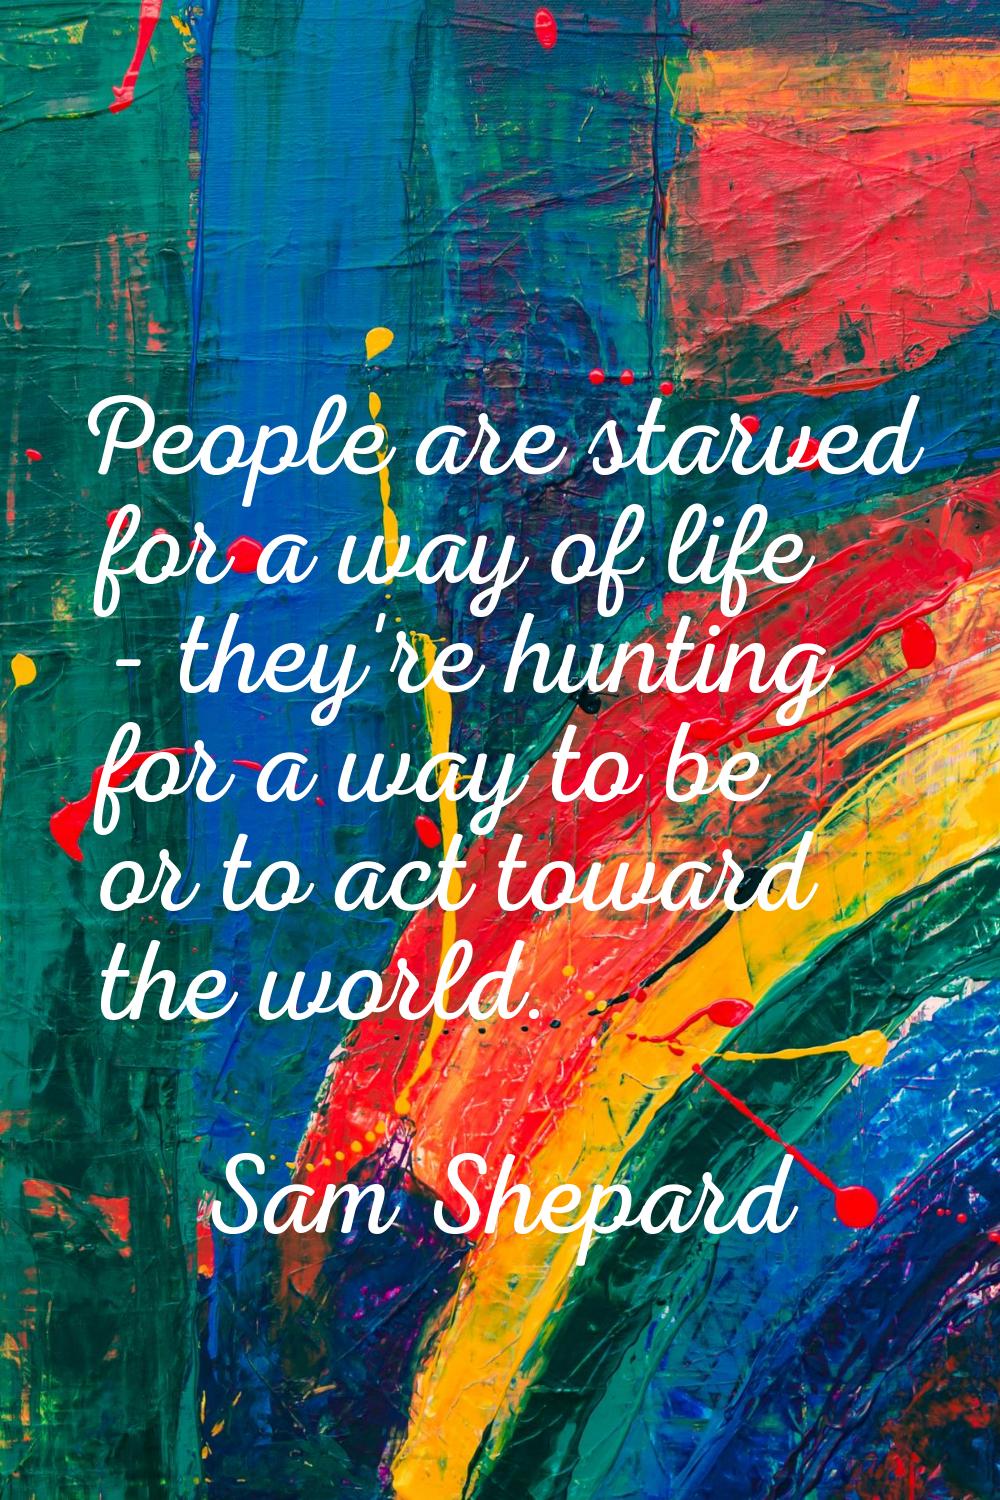 People are starved for a way of life - they're hunting for a way to be or to act toward the world.